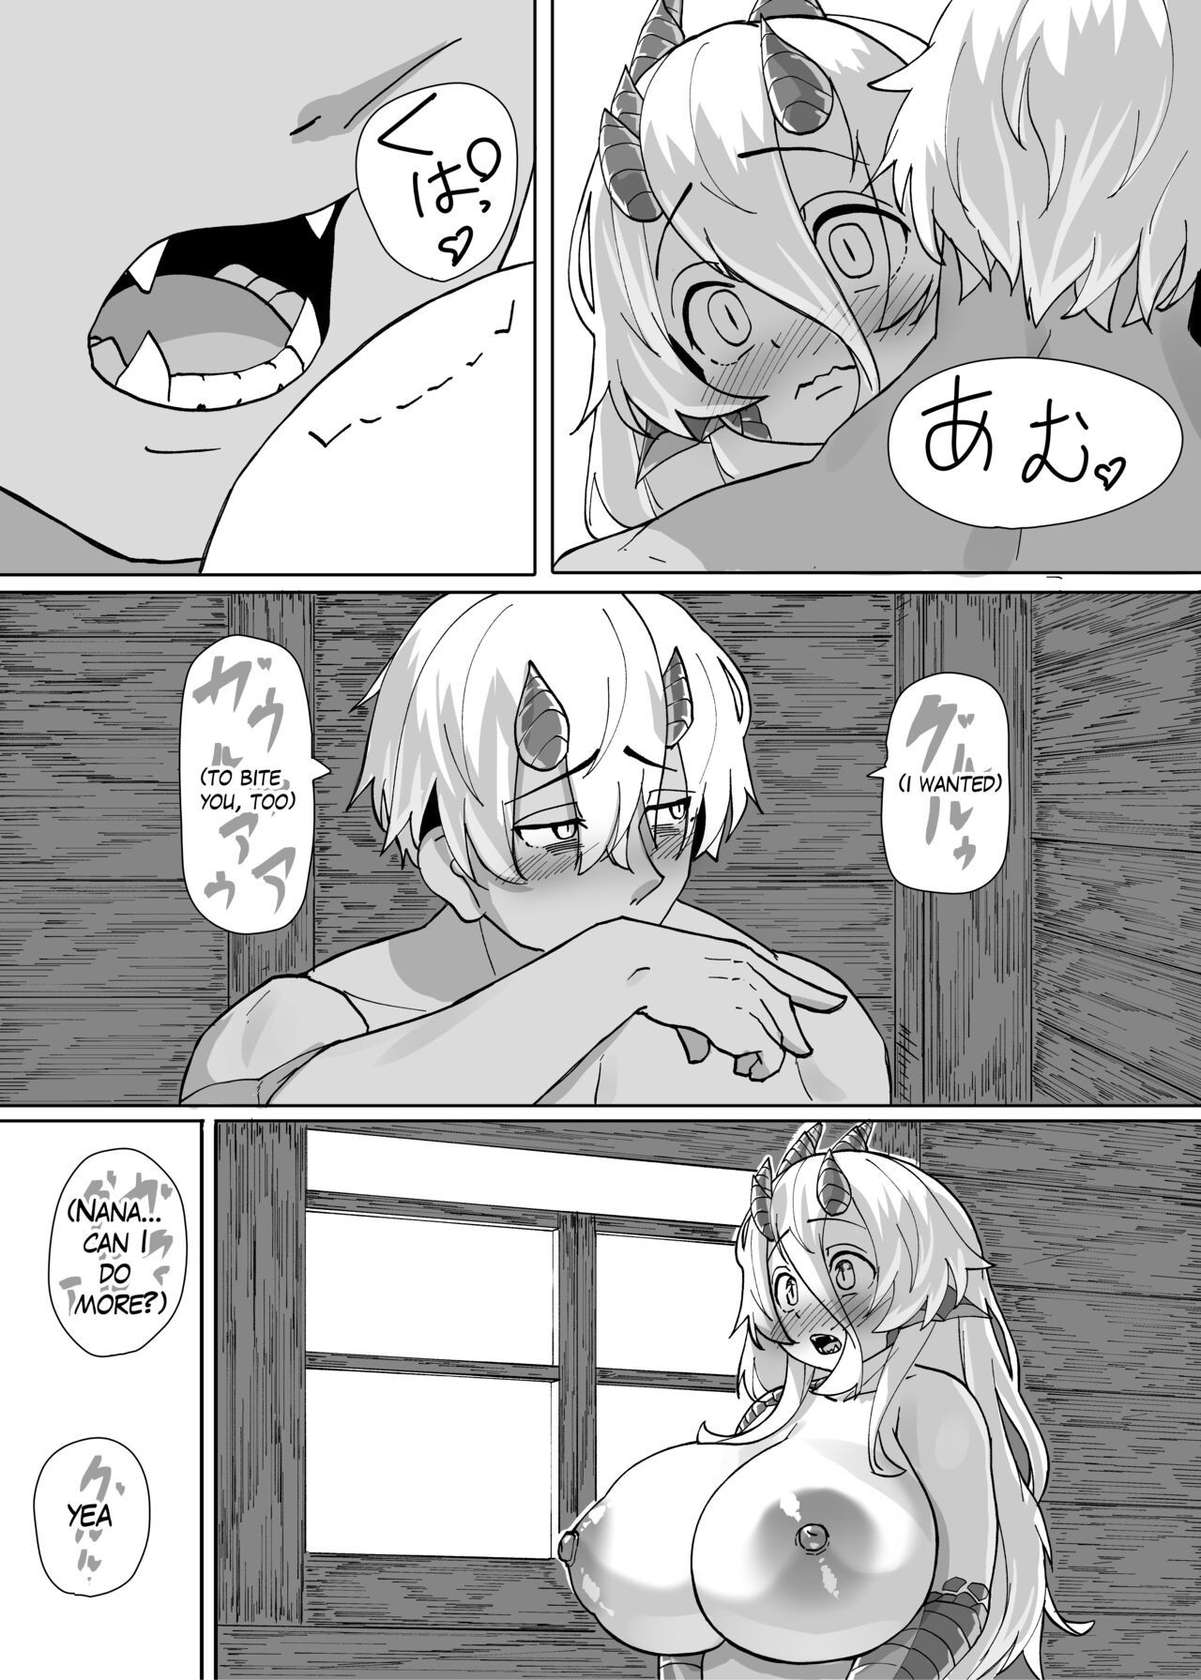 [Saikutsu Kichi (Kagarimachi Konatsu)] Because That Night Was The Happiest They've Ever Been - Persecuted Dragon Girl and an Assassin at His Limit Forget Human Speech and Have Beastly Sex[English] [Digital]